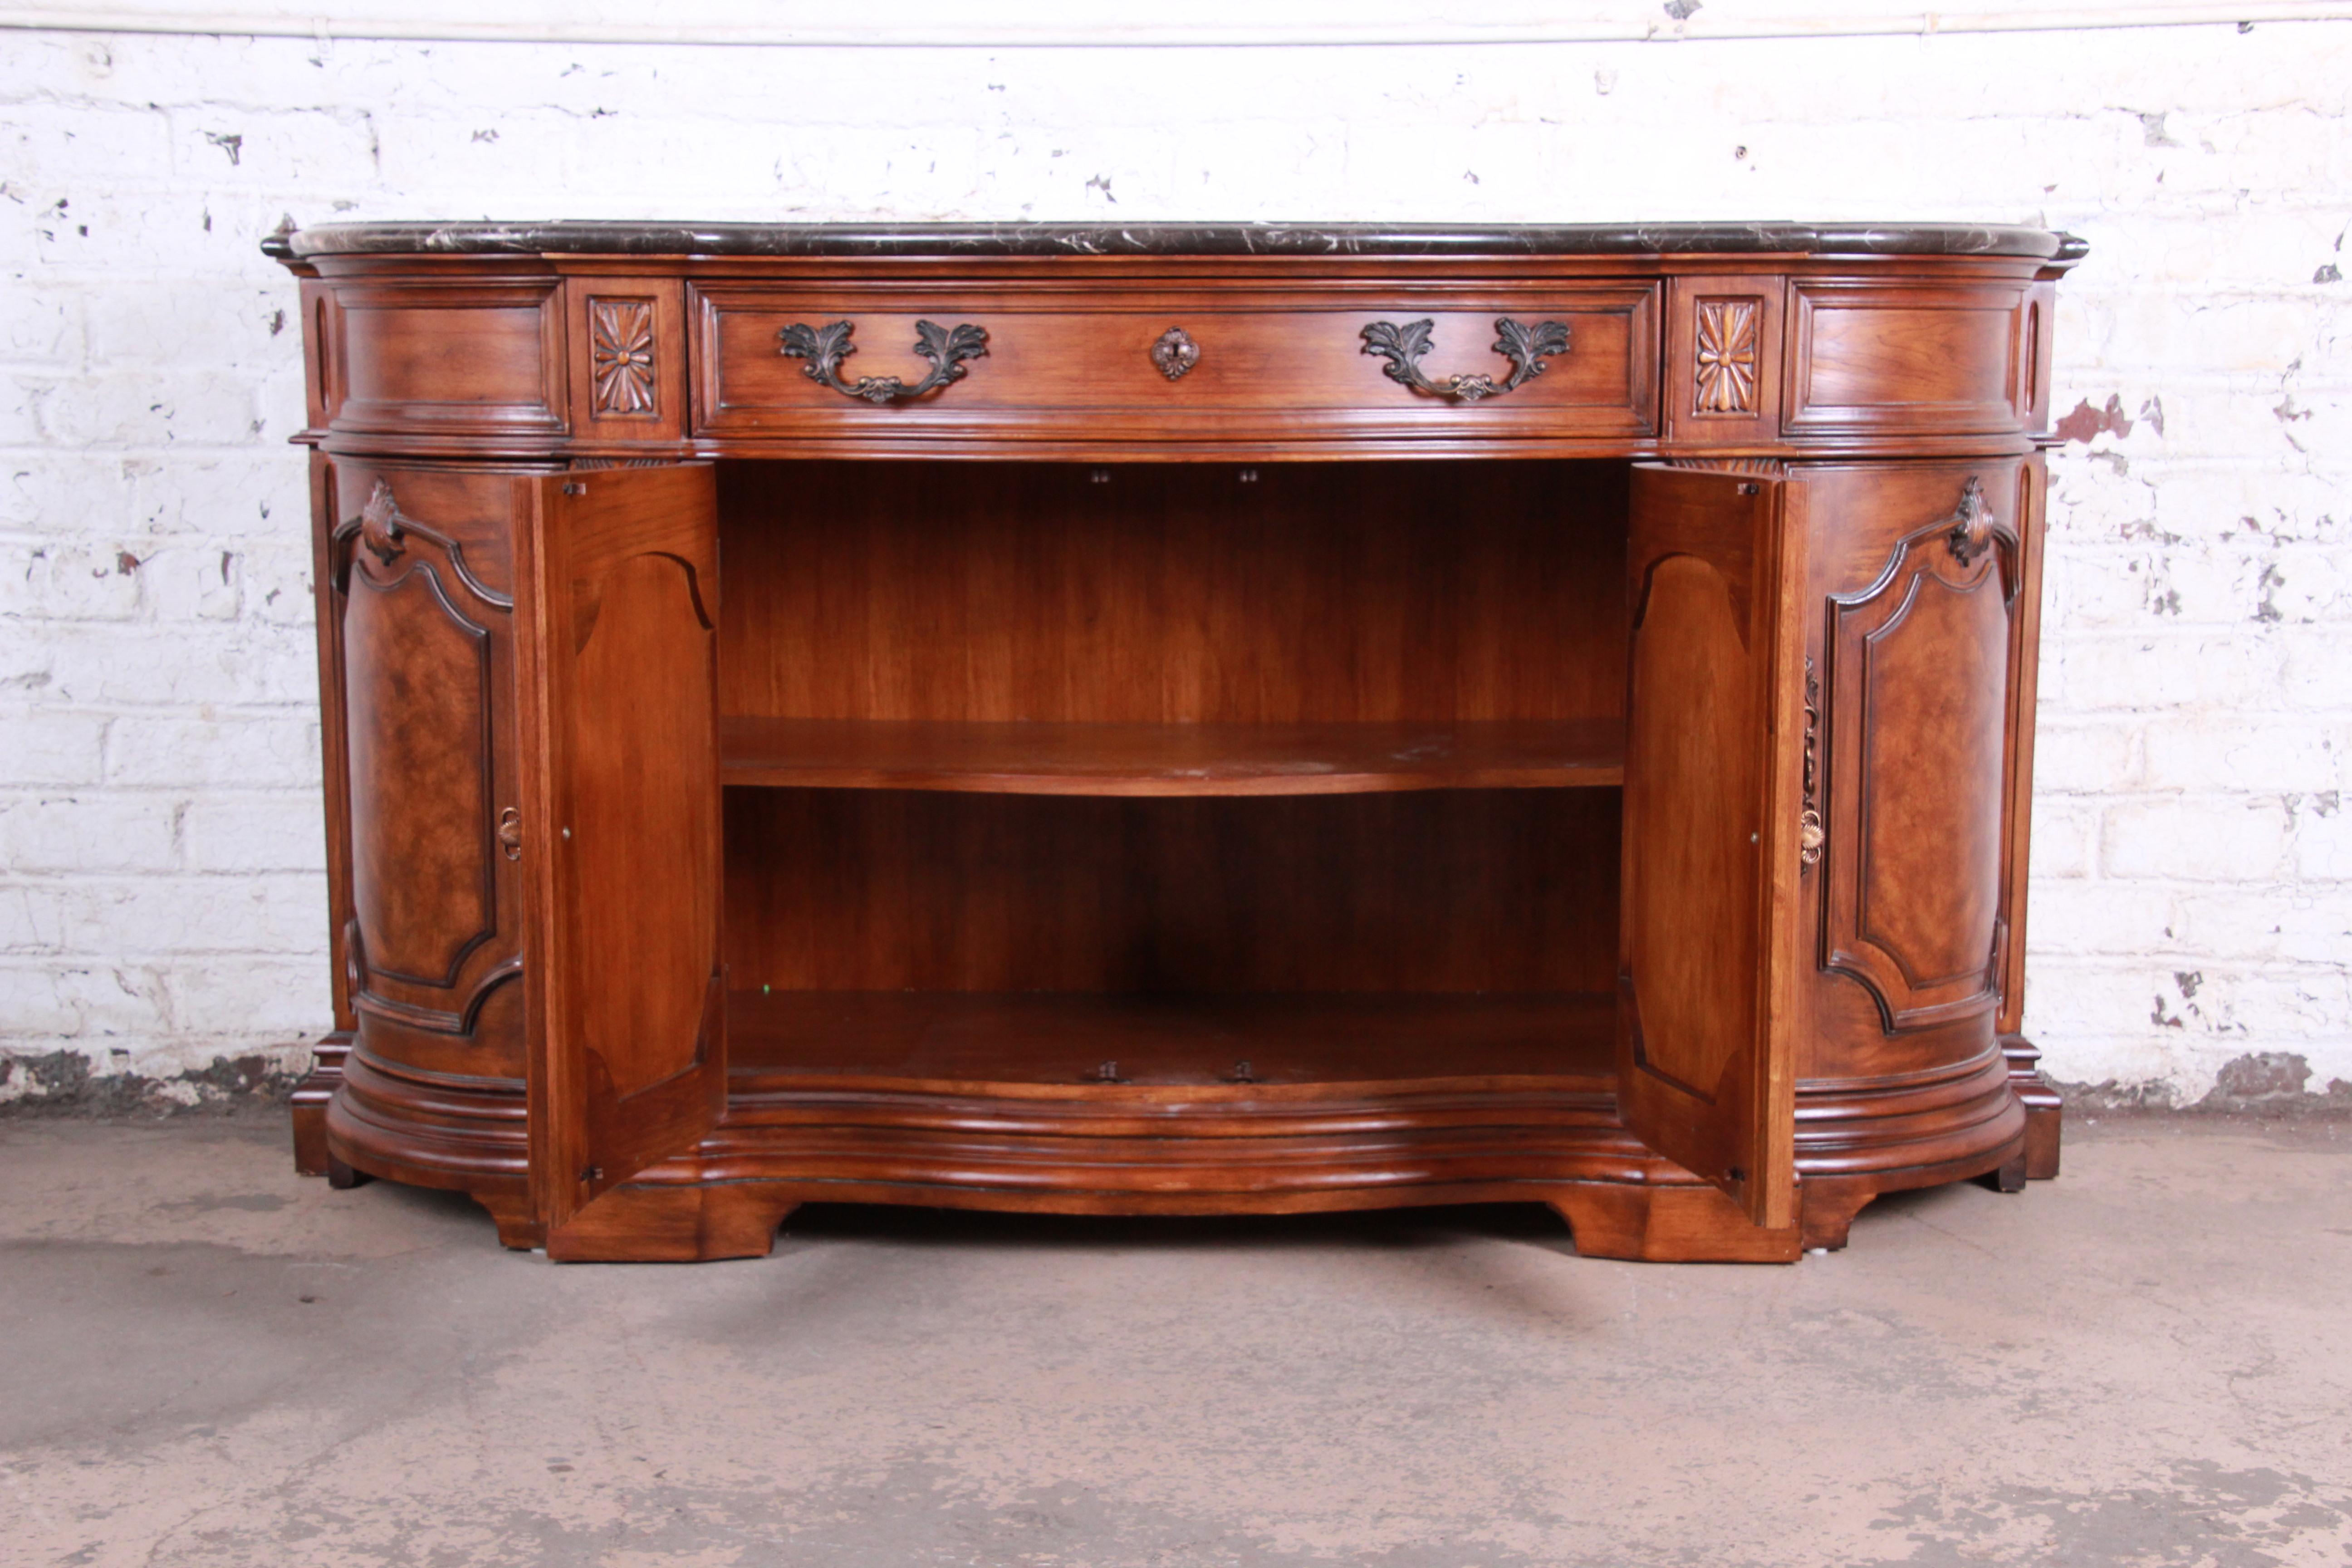 20th Century Drexel Heritage French Carved Burled Walnut Marble-Top Sideboard Credenza